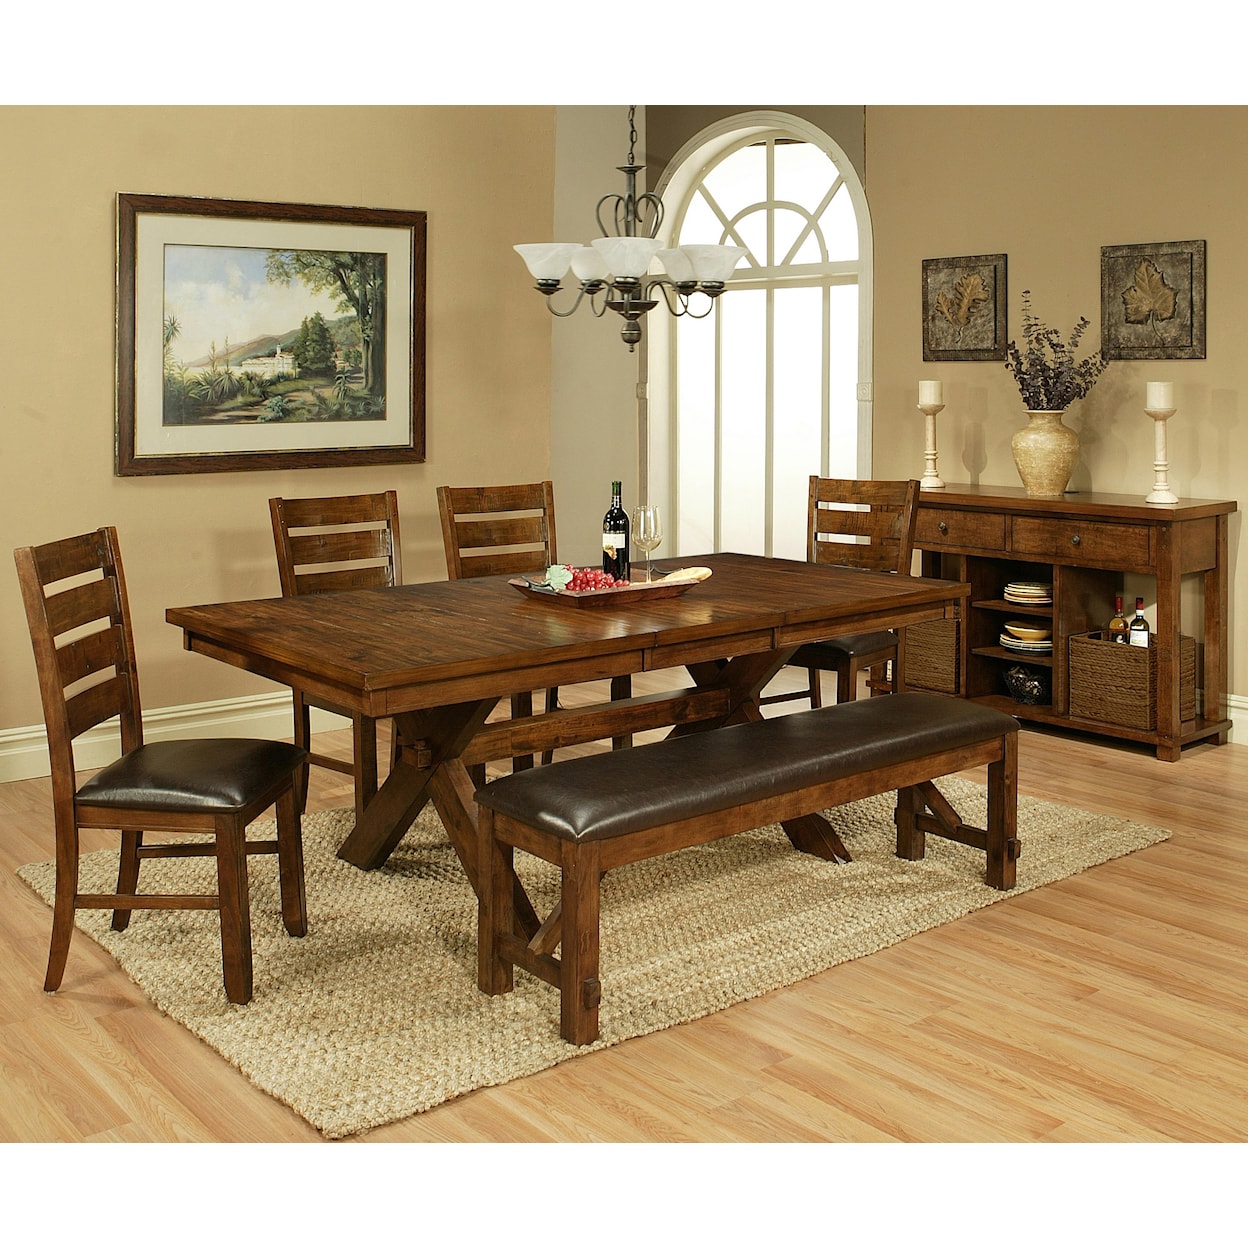 APA by Whalen Vineyard Formal Dining Room Group